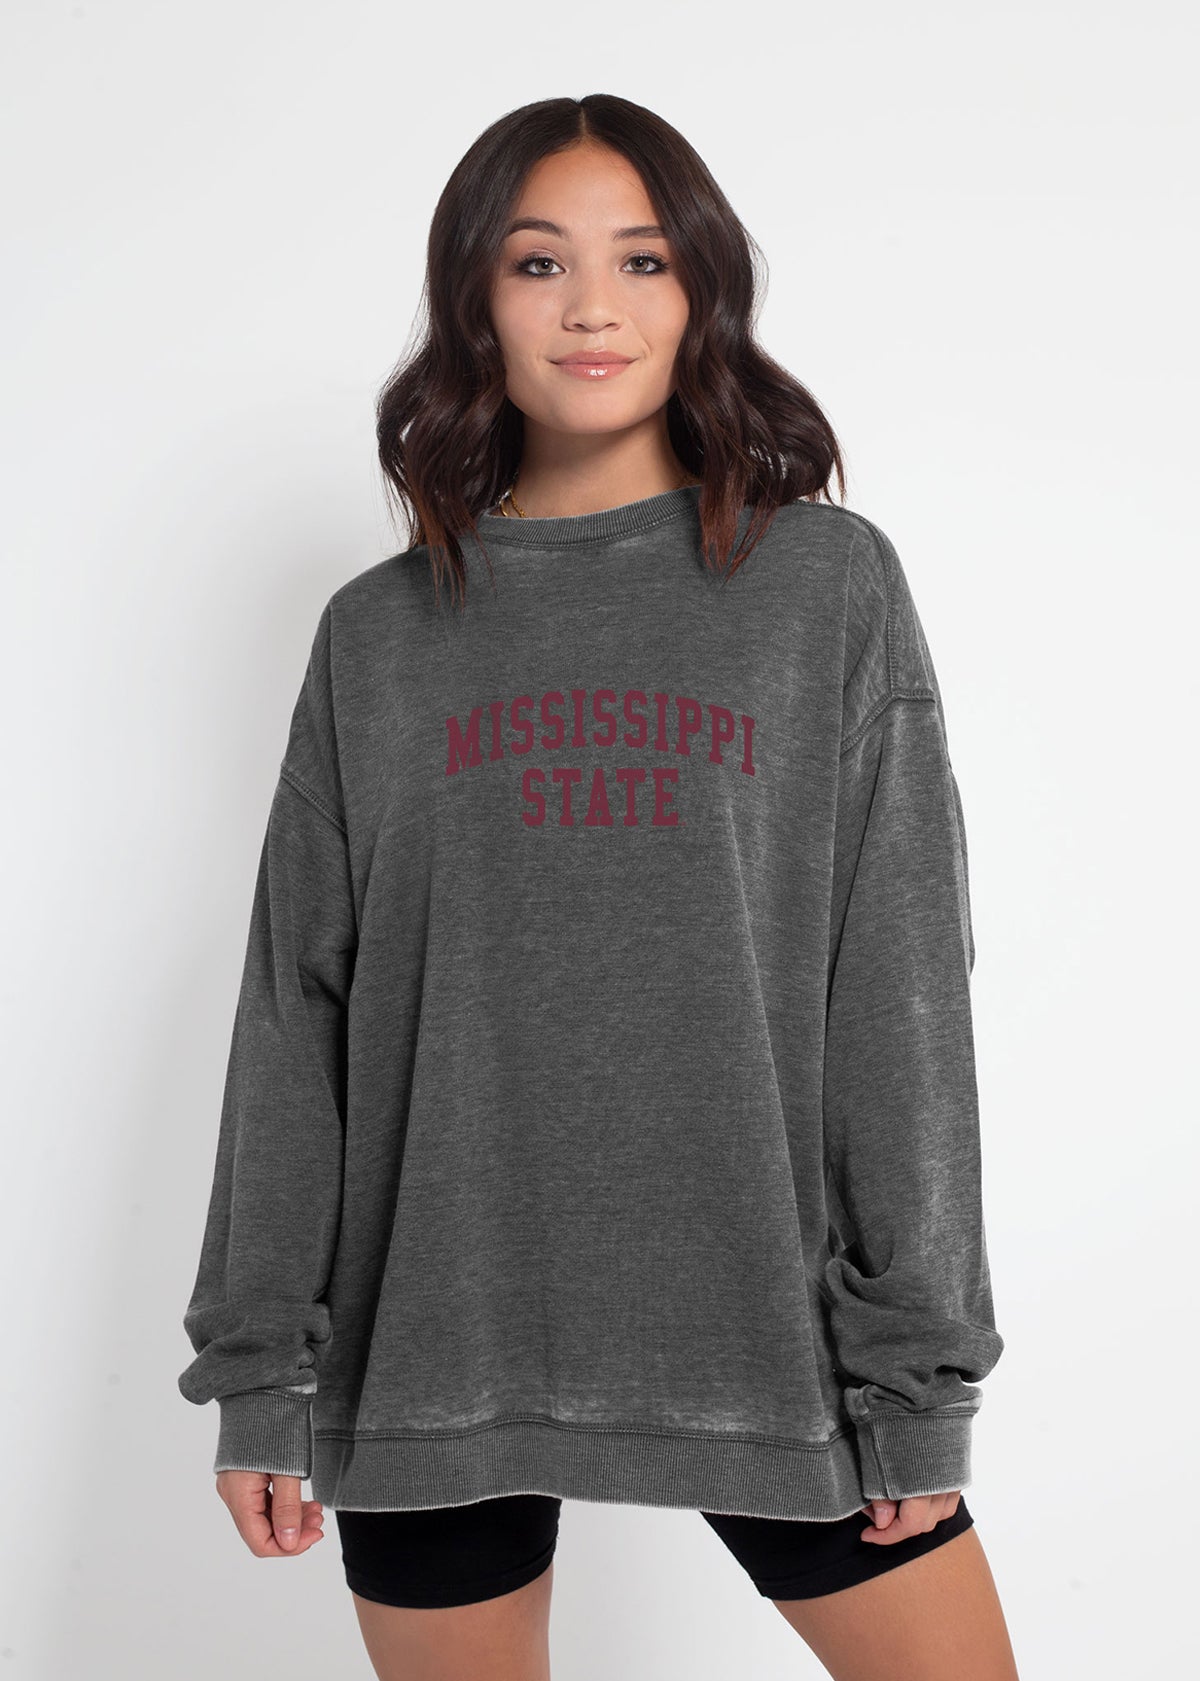 Campus Crew Sweatshirt Mississippi State Bulldogs in Charcoal